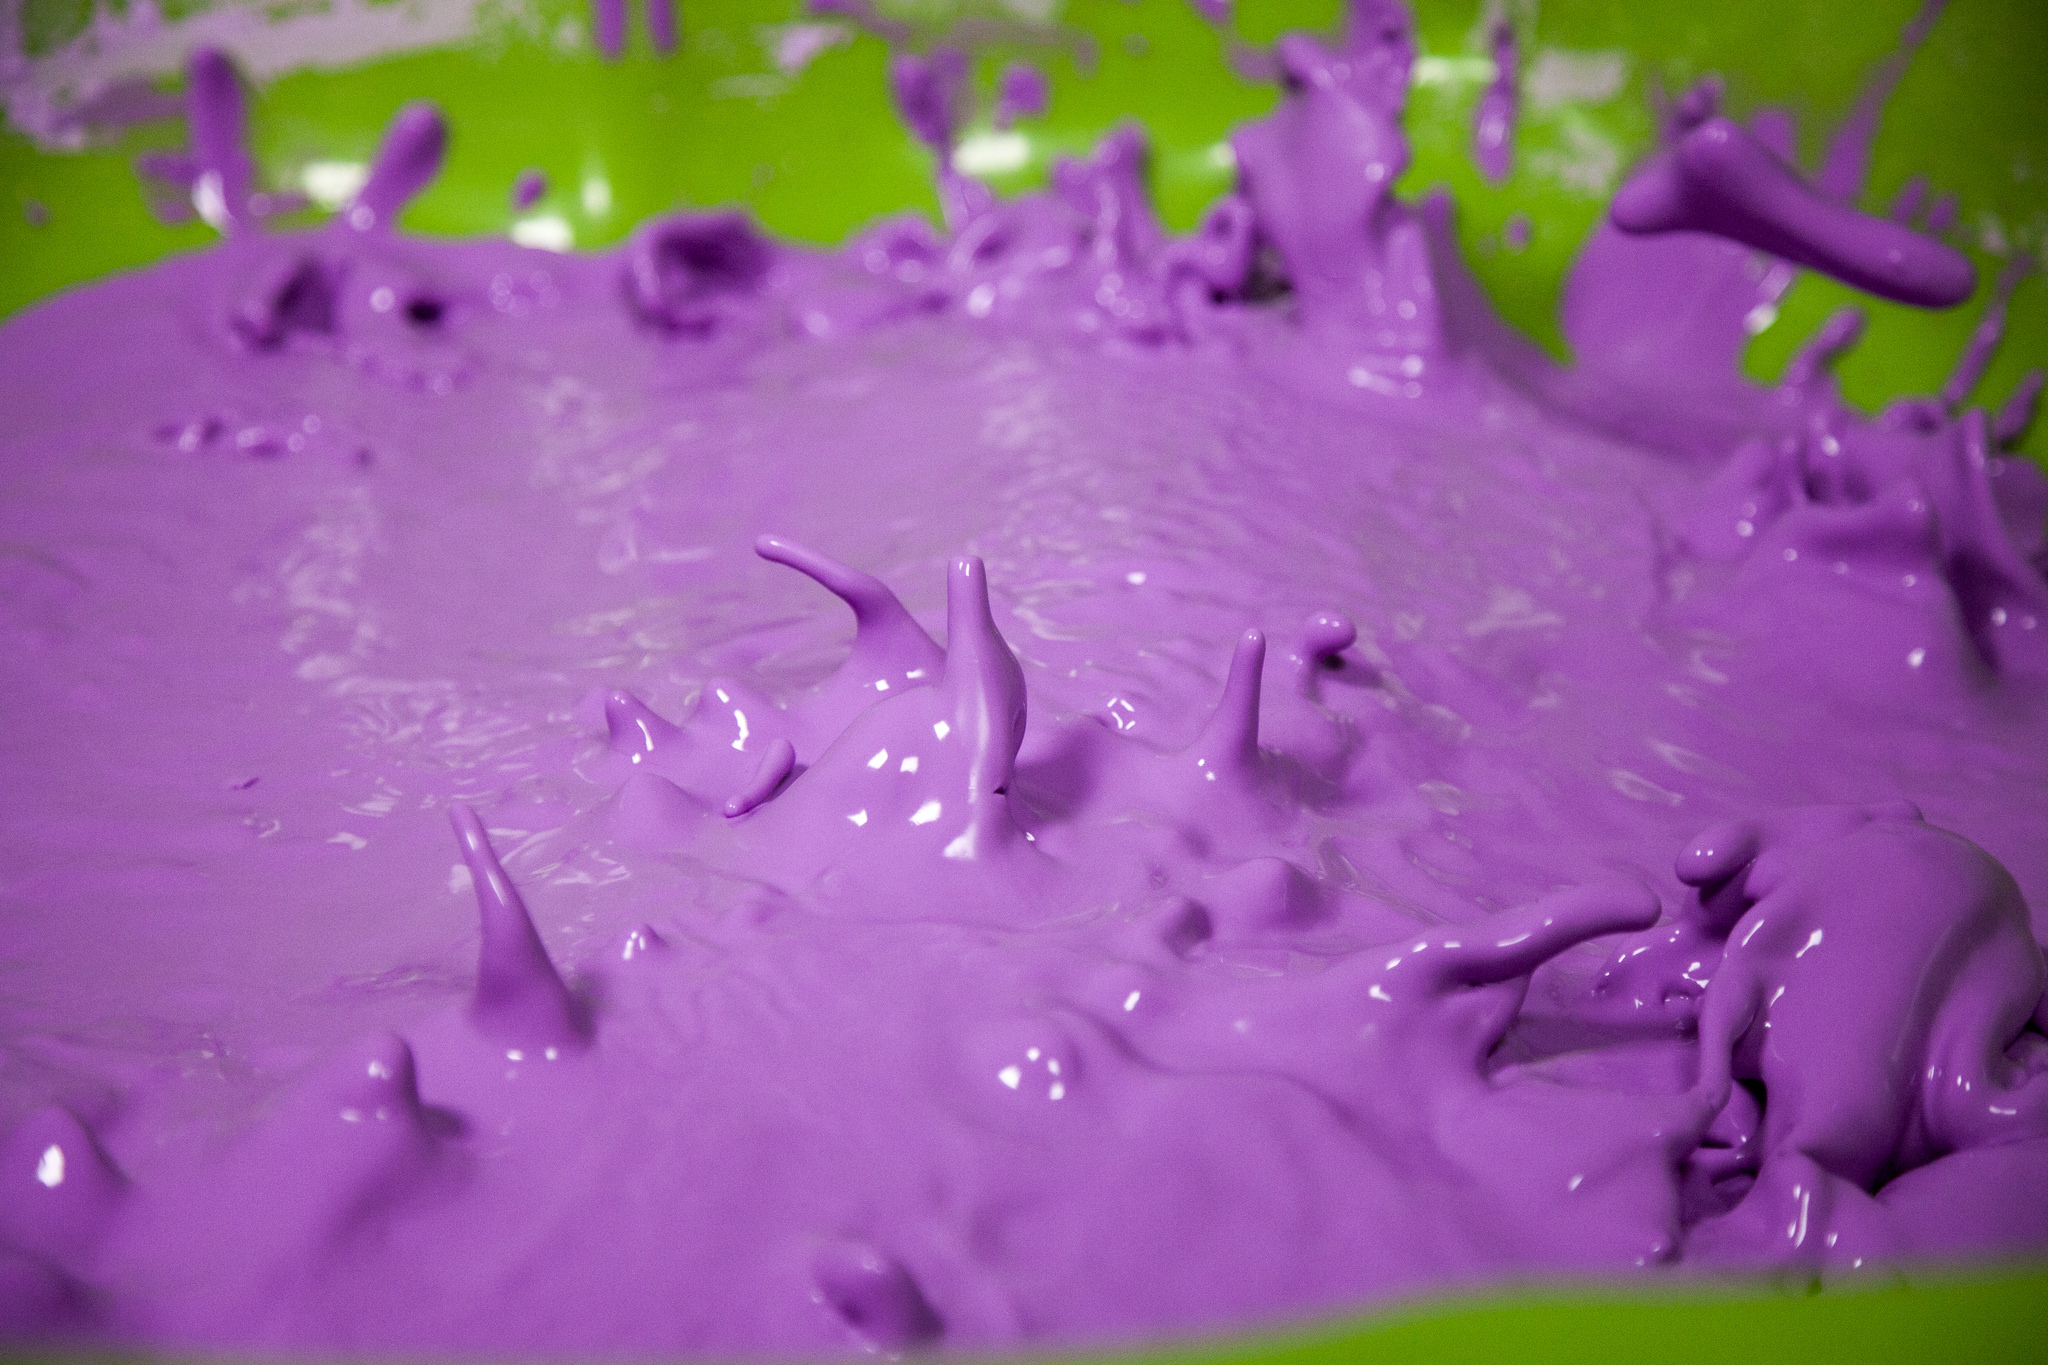 The Physics Of Non-Newtonian Goo Could Save Astronauts’ Lives